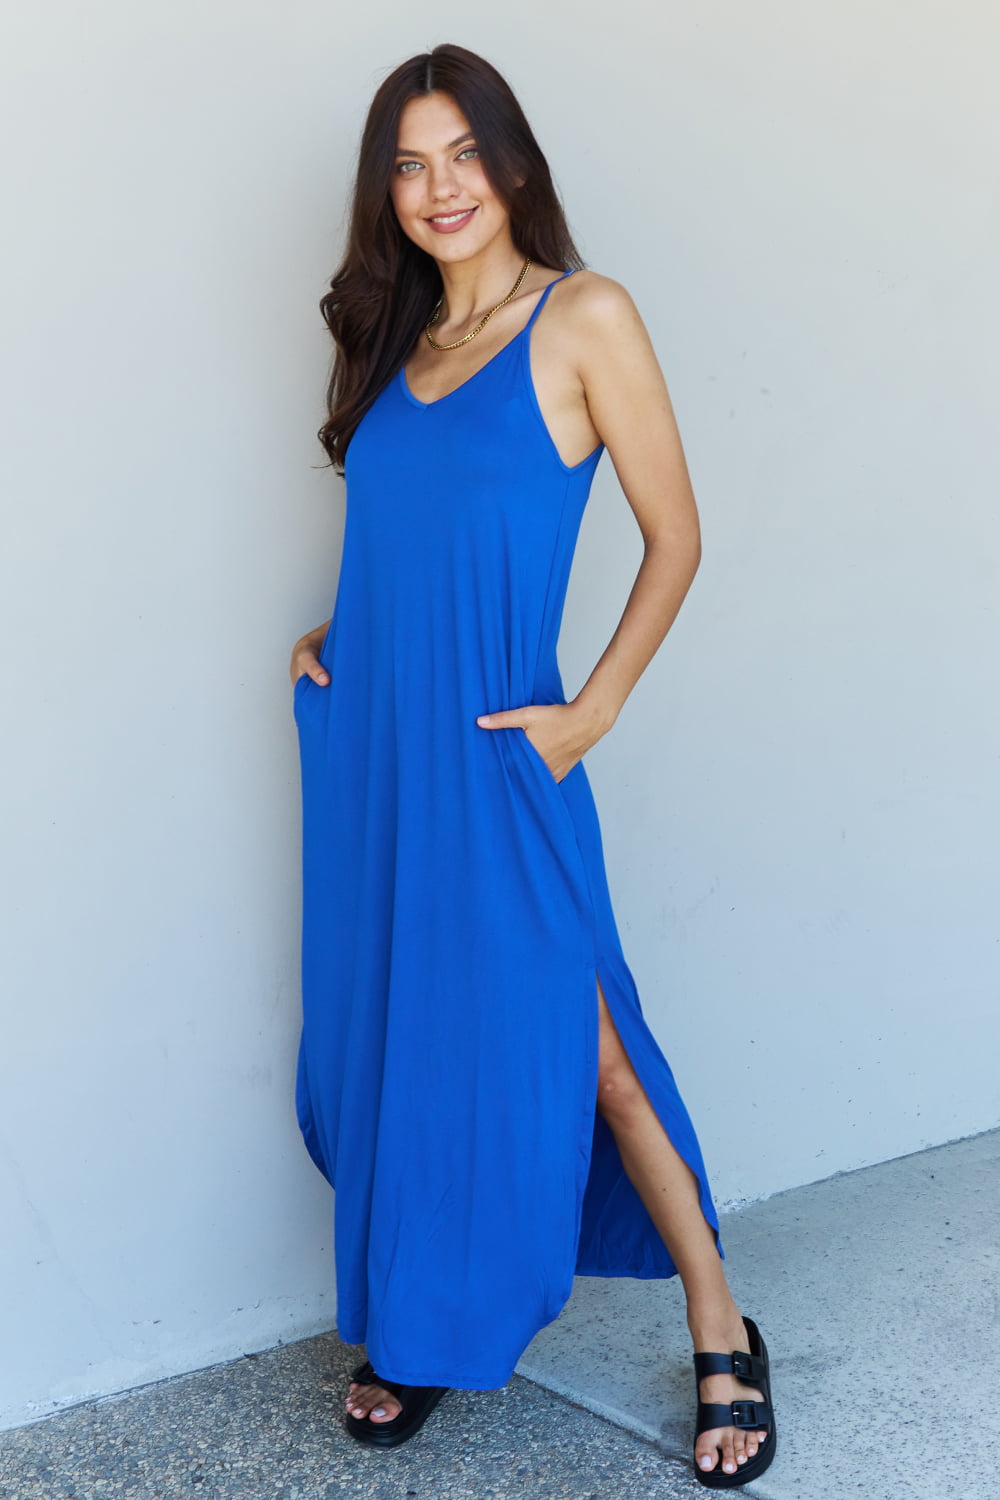 Cami Side Slit Maxi Dress in Royal Blue up to 3XL - Shell Design Boutique